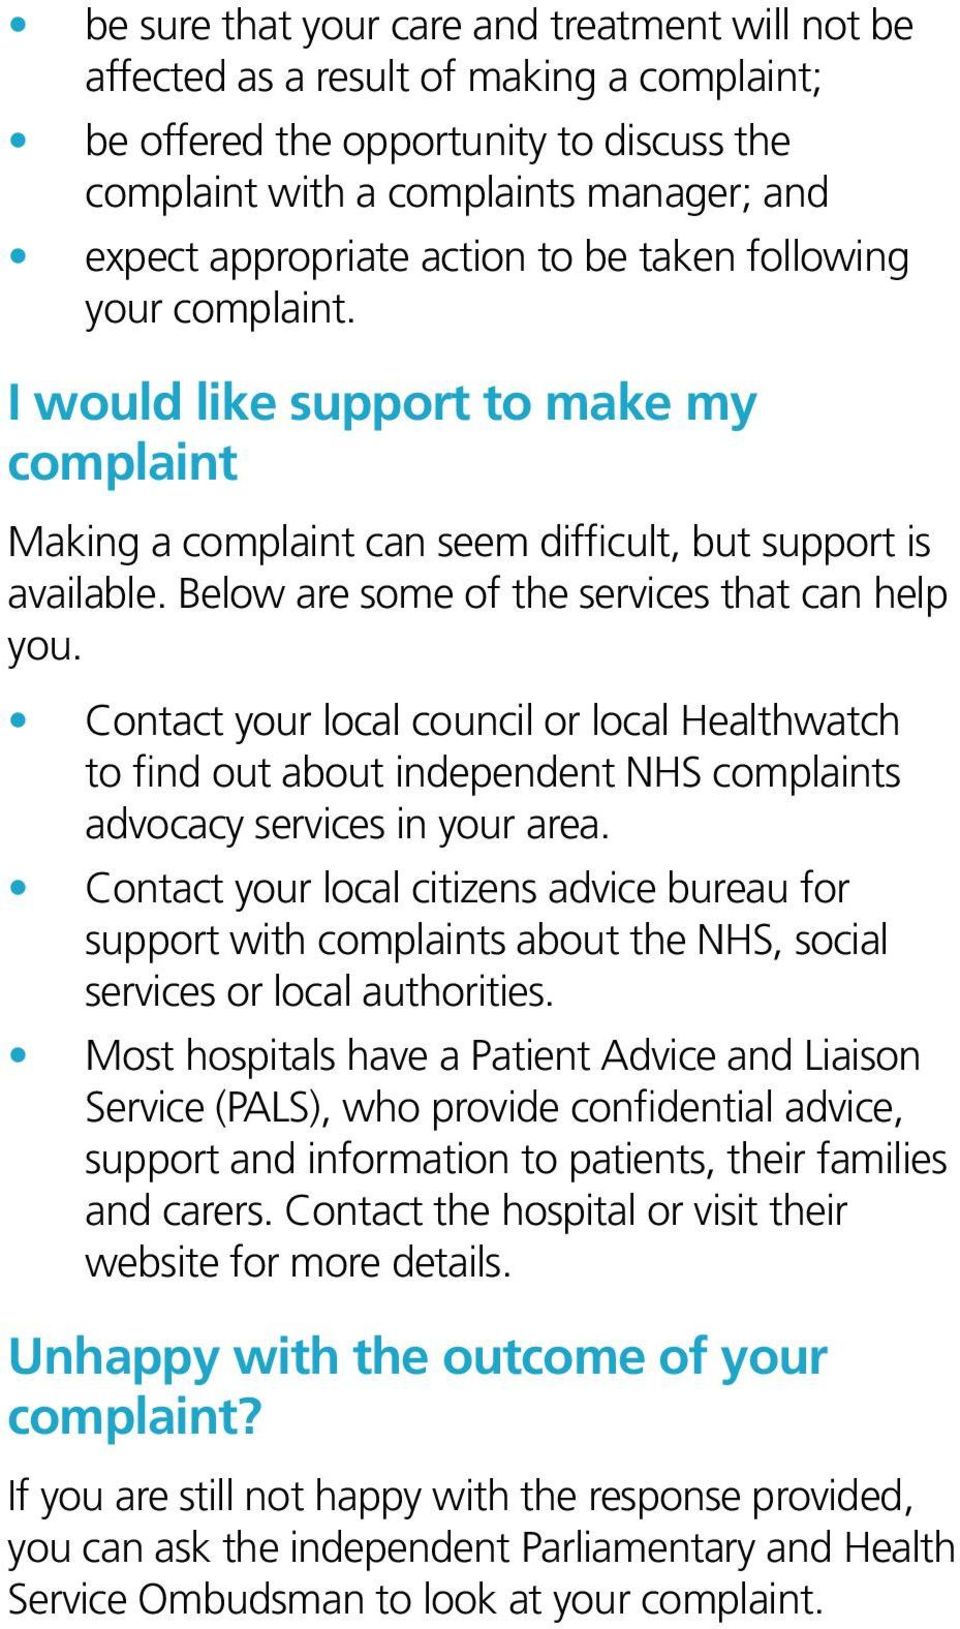 Below are some of the services that can help you. Contact your local council or local Healthwatch to find out about independent NHS complaints advocacy services in your area.